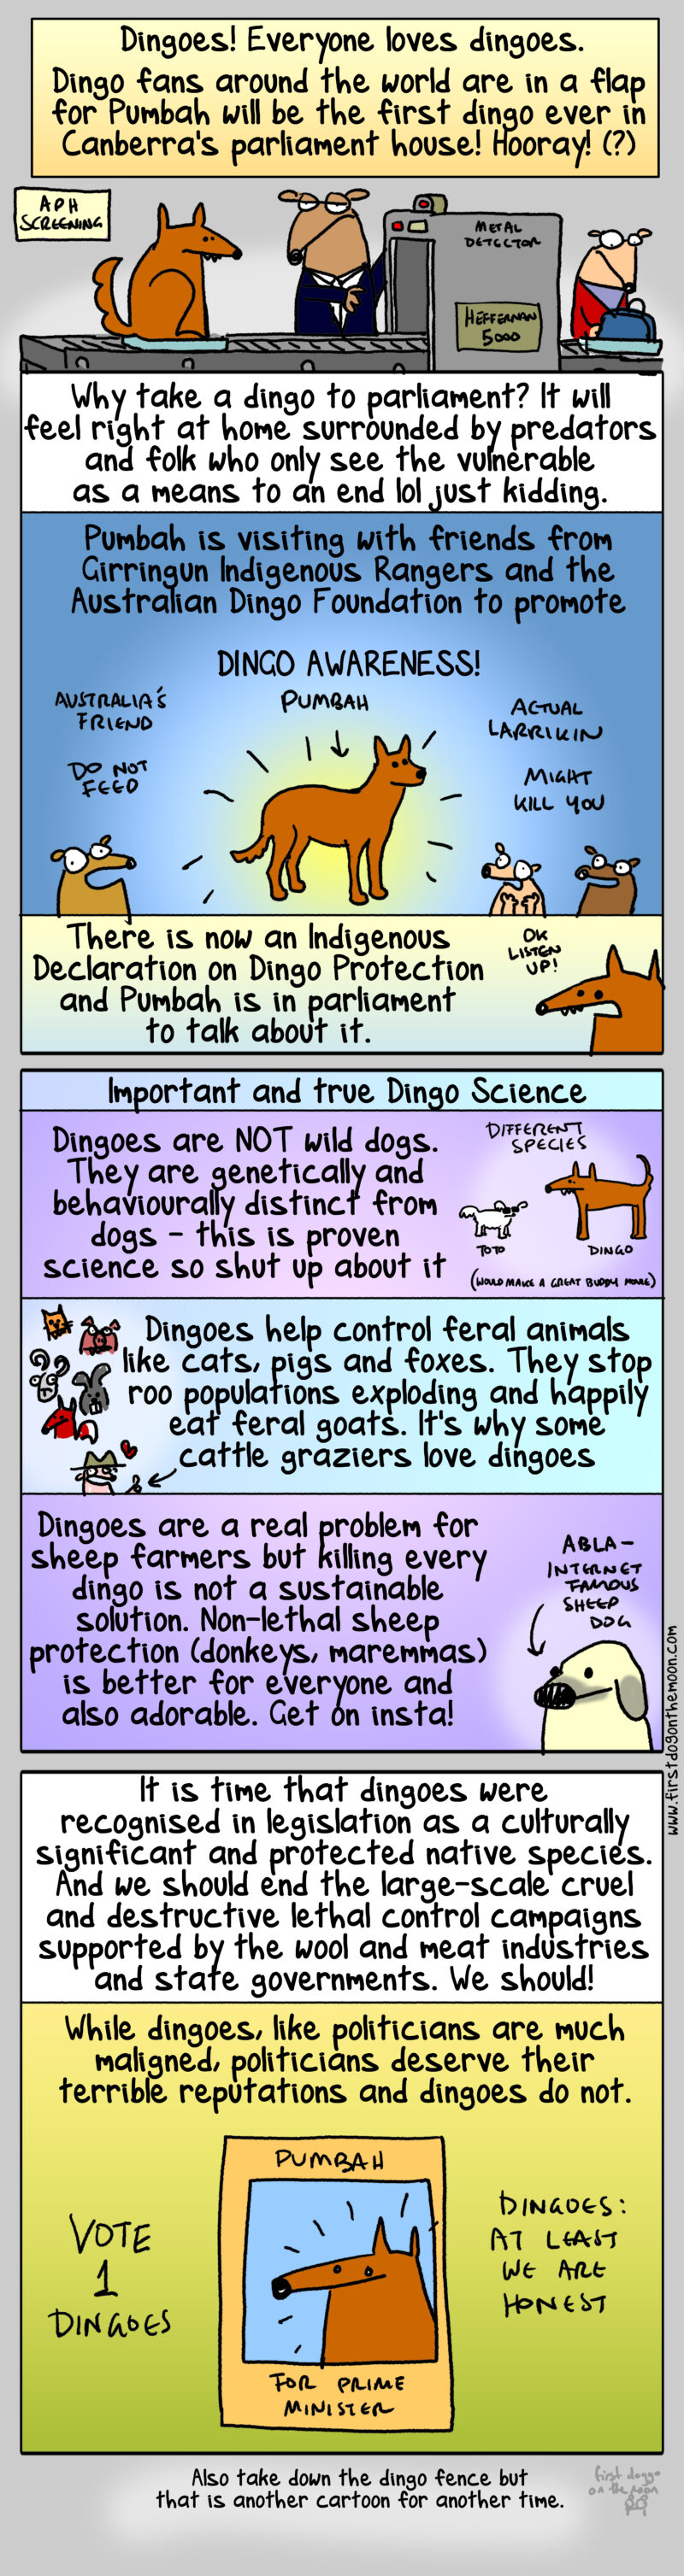 Dingo fans rejoice: a dingo is finally going to parliament! Hooray! What?